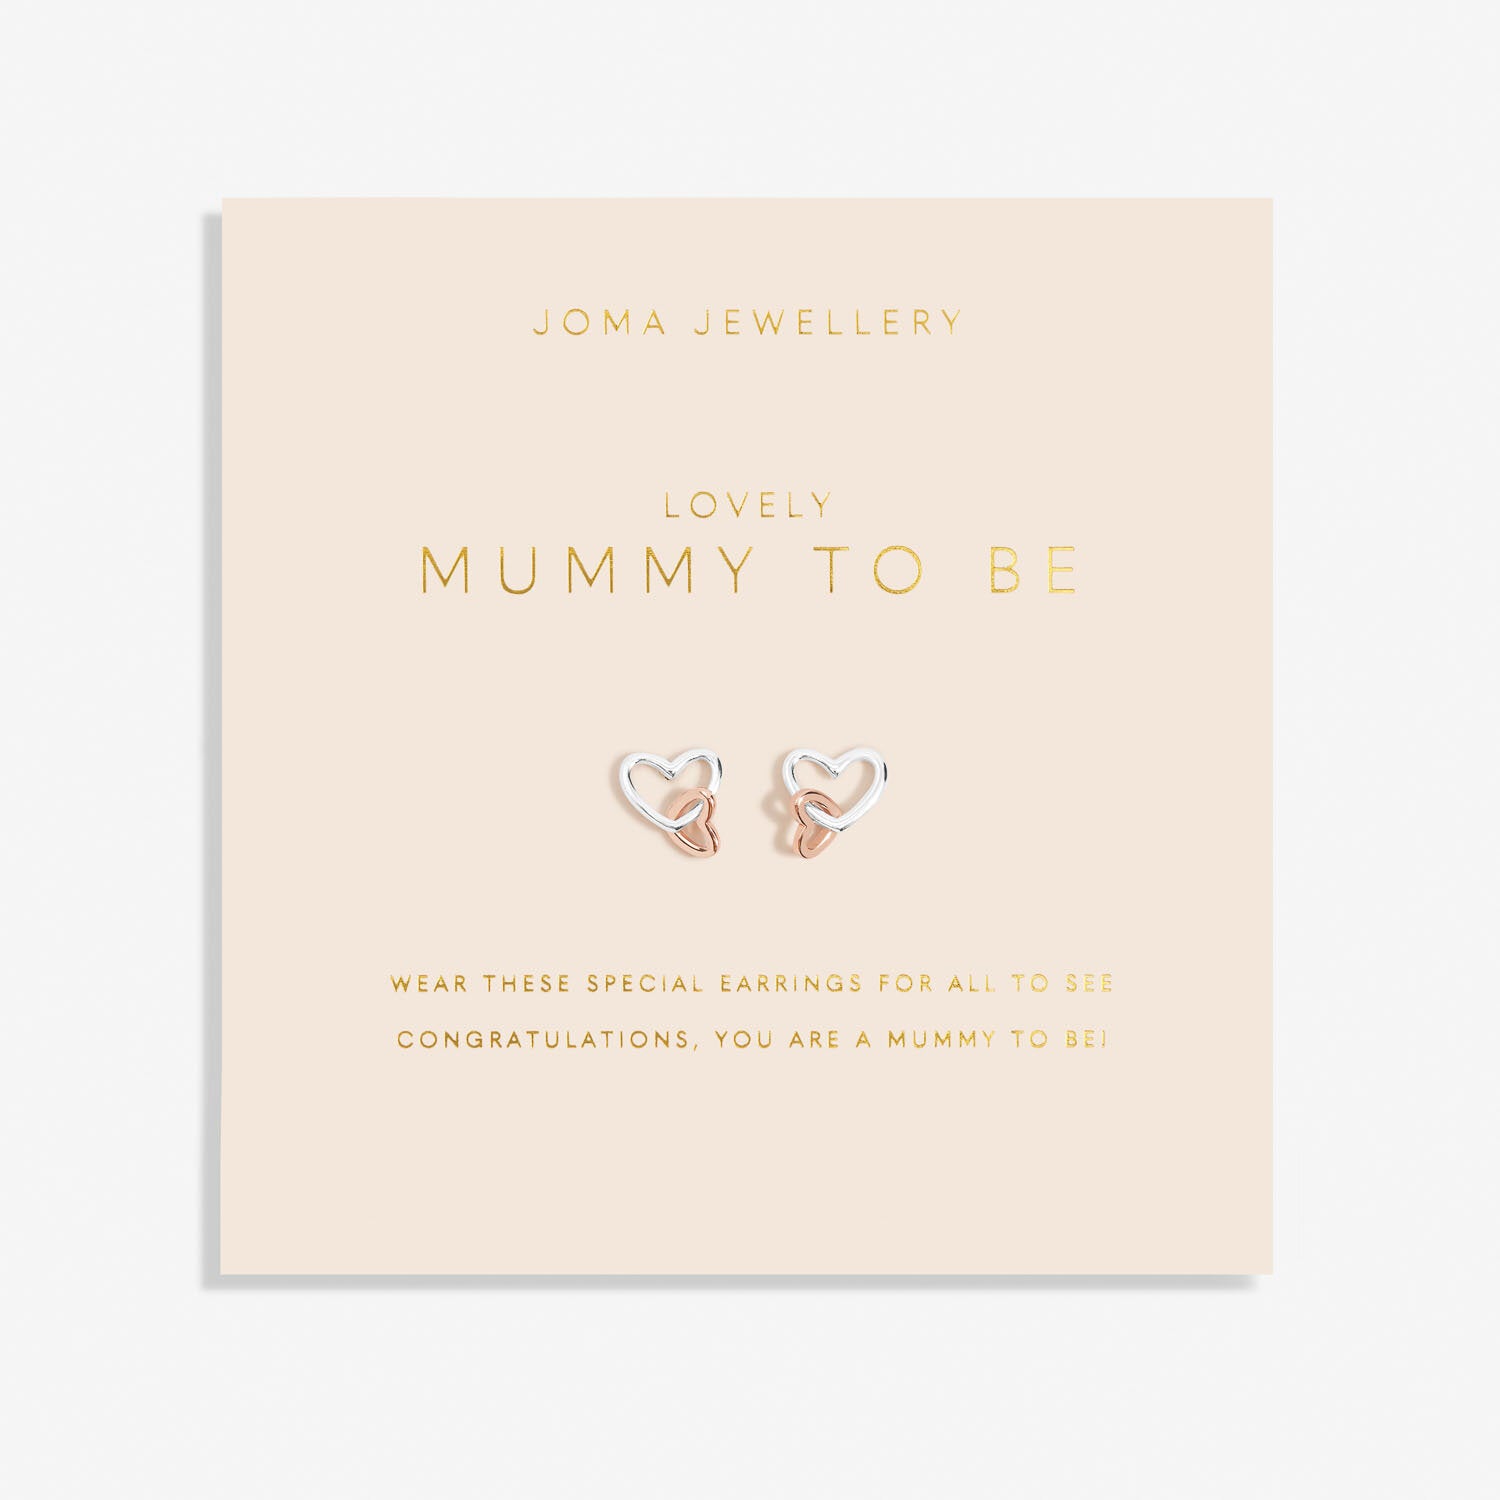 Forever Yours 'Lovely Mummy To Be' Earrings - Joma Jewellery